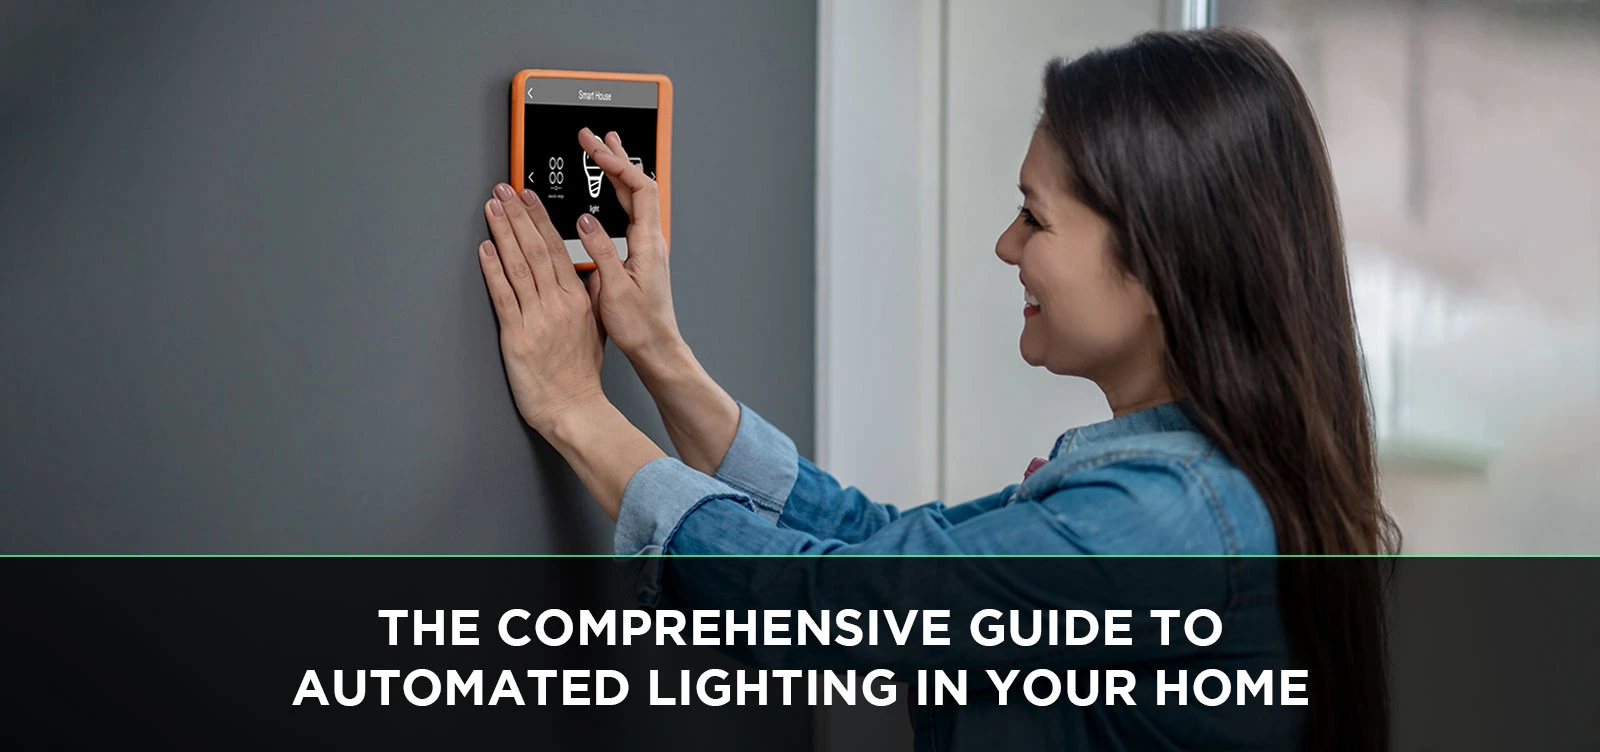 The Comprehensive Guide to Automated Lighting in Your Home